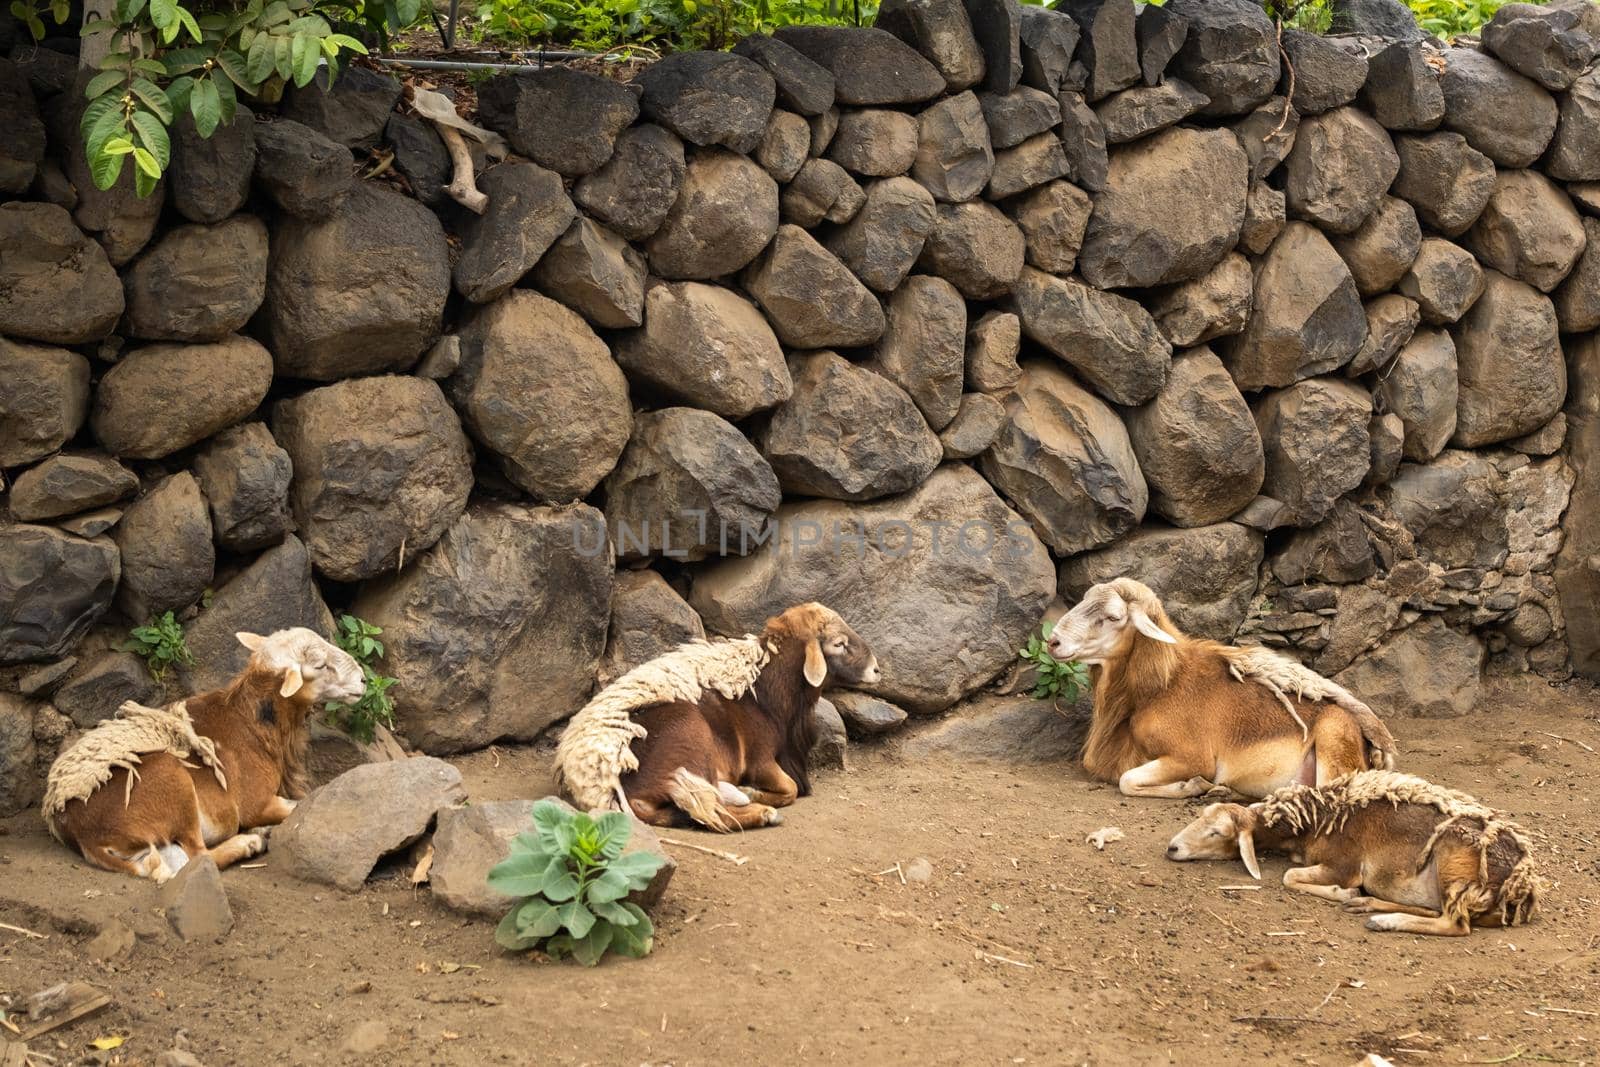 Sheep mostly rest on the island of Tenerife. Sheep in the Canary Islands by Lobachad